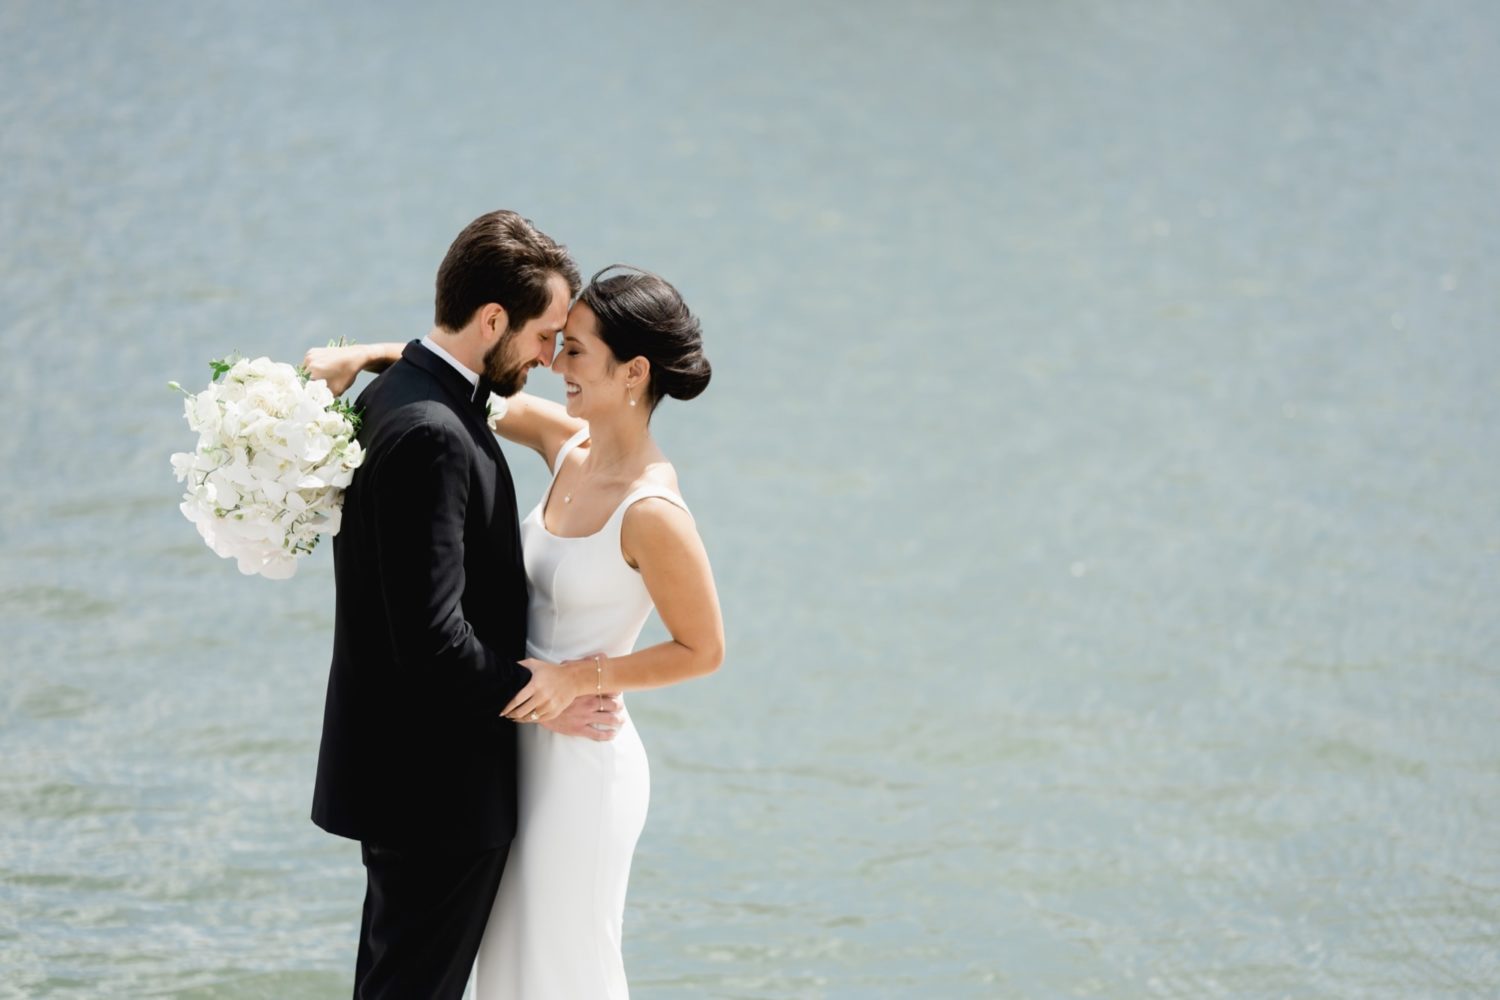 Bride and groom embracing each other by the water at the St. Louis Art Museum